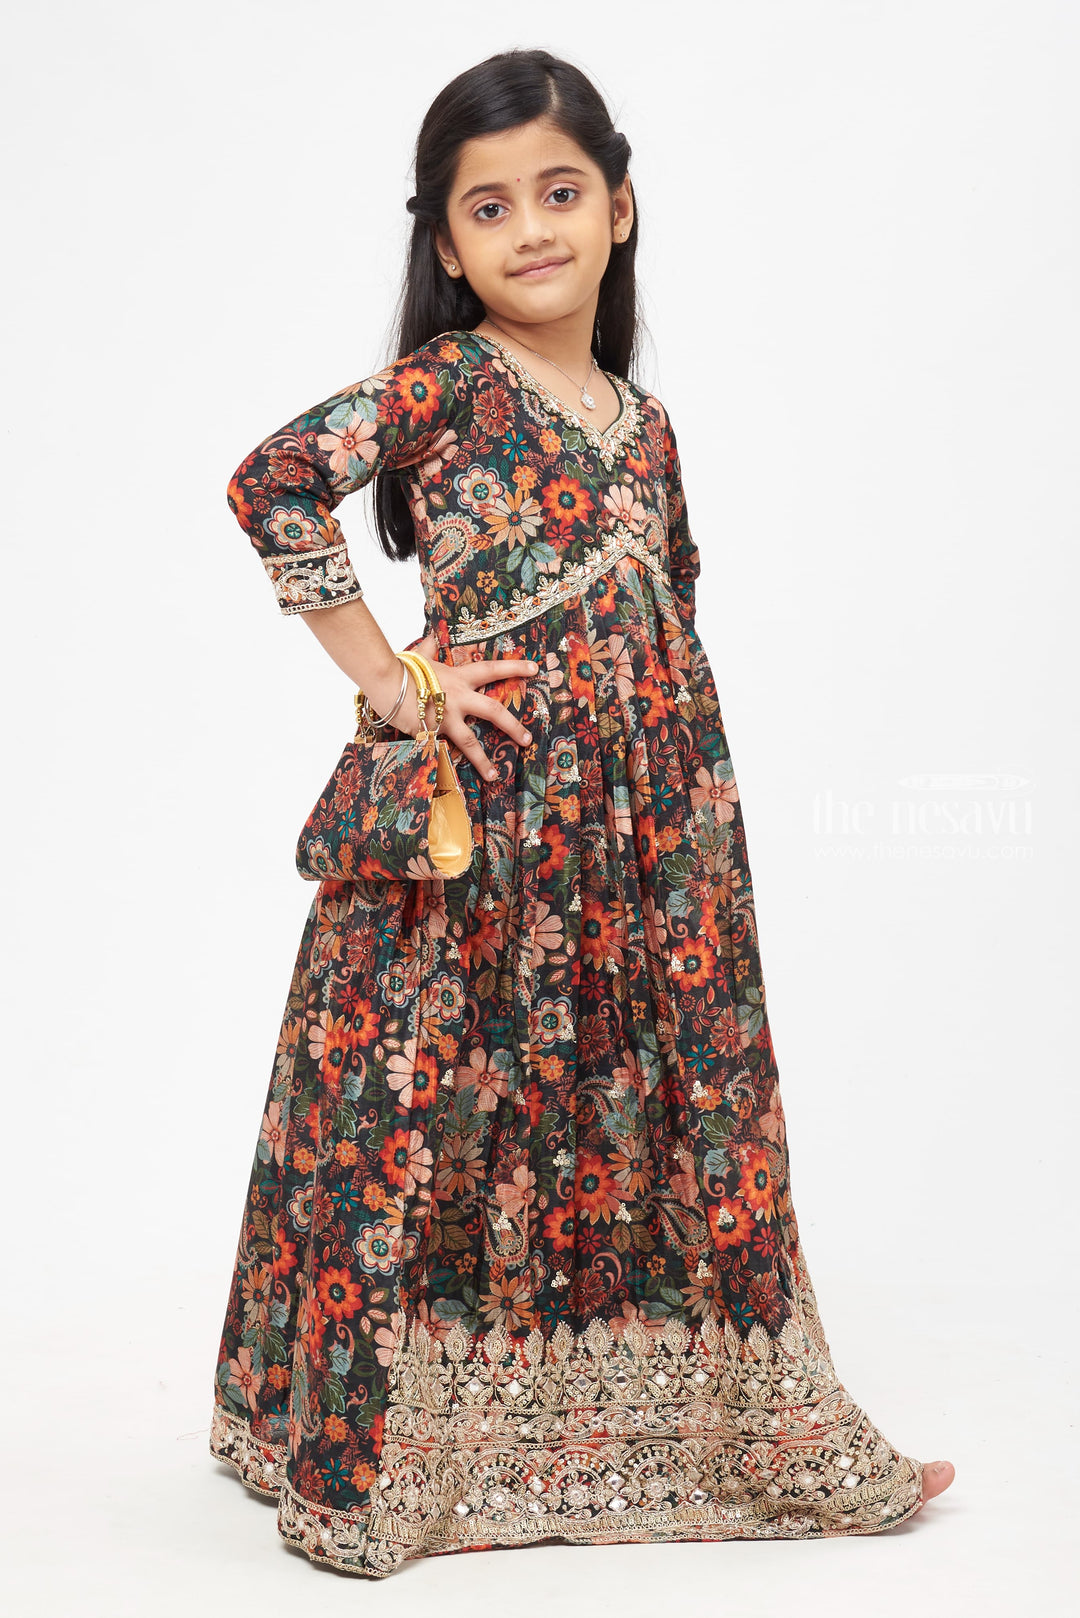 The Nesavu Girls Party Gown Regal Botanical Diwali Anarkali Gown with Intricate Silver Accents for Girls Nesavu Floral Designer Anarkali Gown | Diwali Special Festive Collection for Girls | The Nesavu